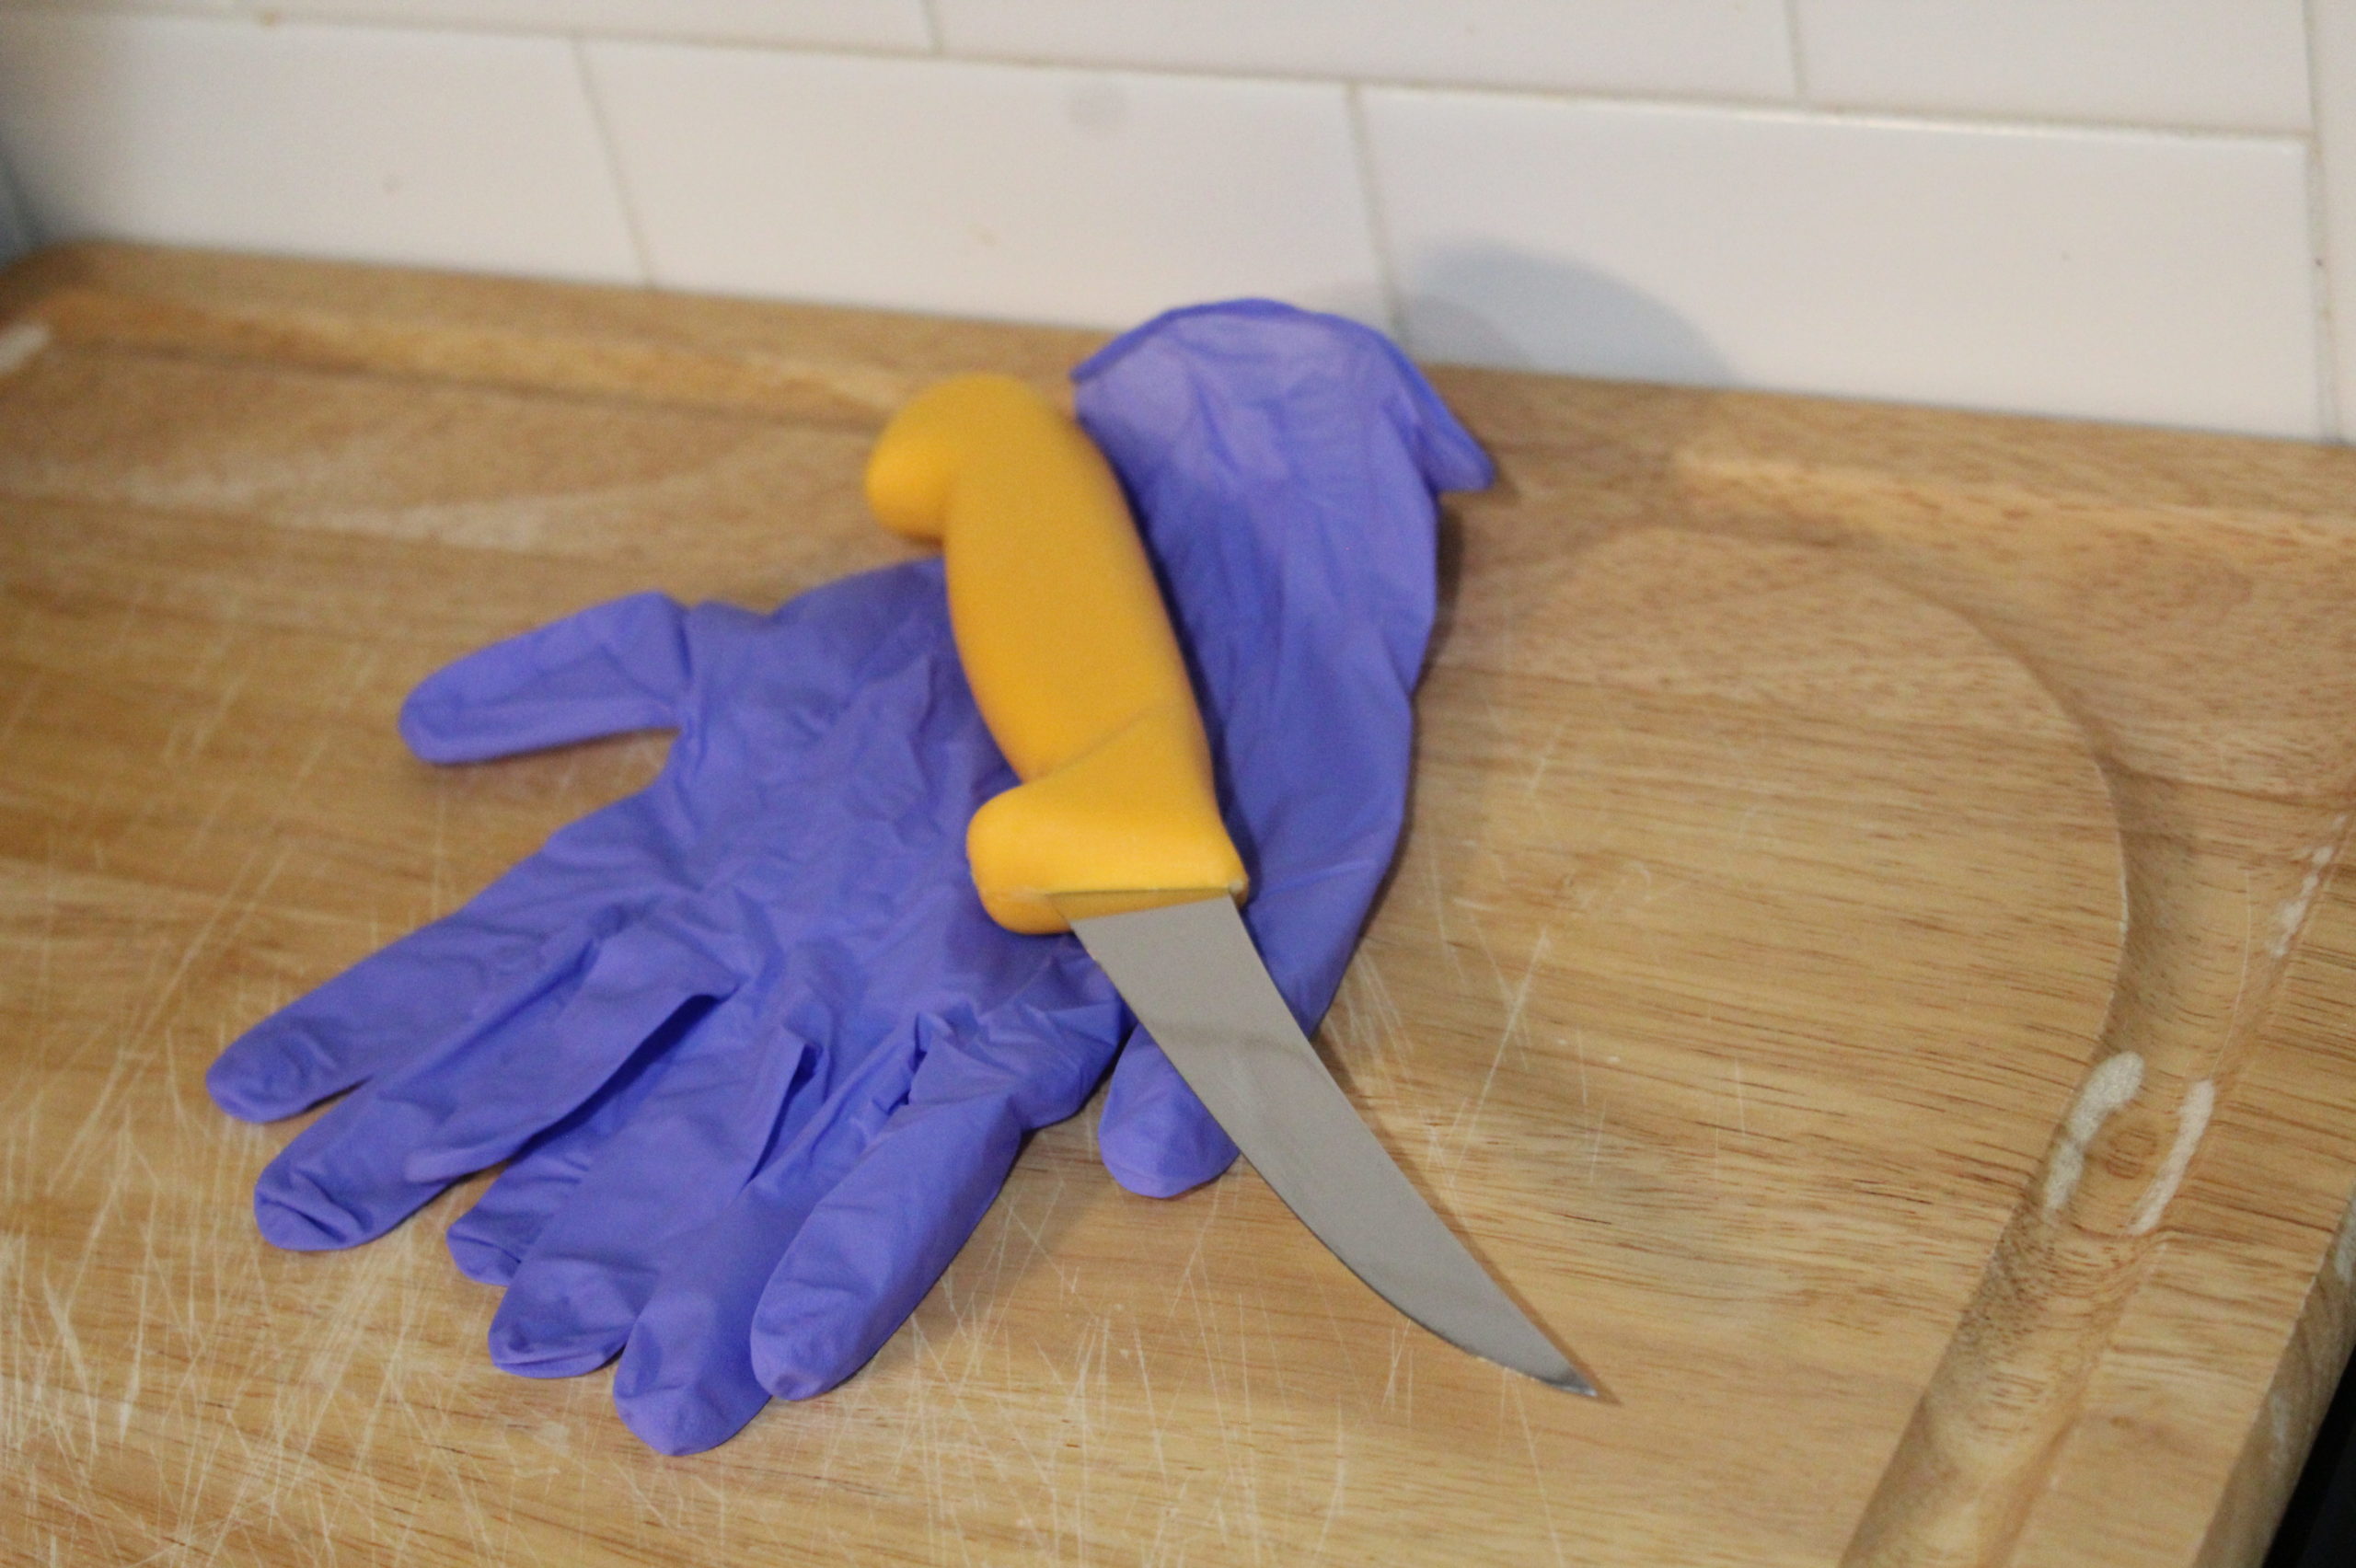 Knife on cutting board with latex gloves